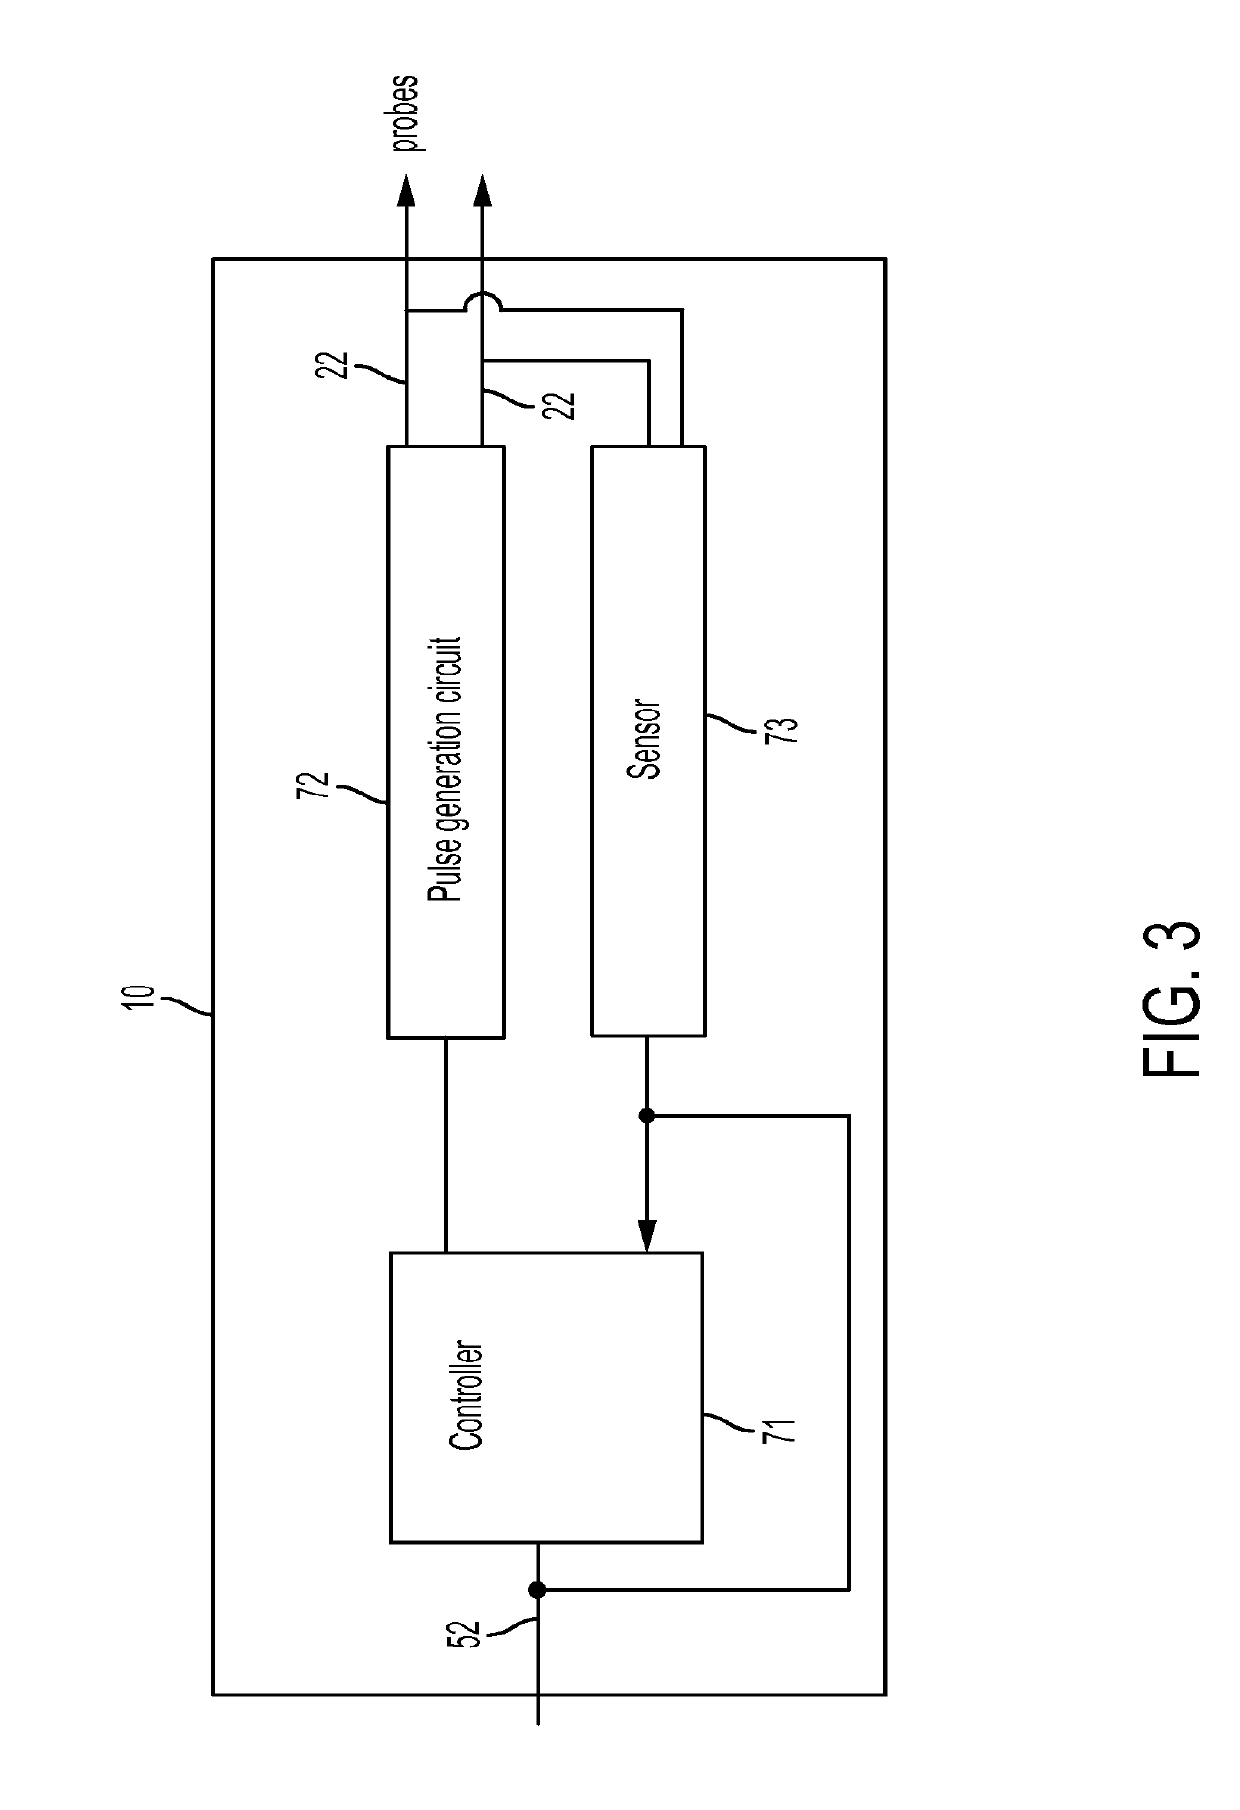 System and method for ablating a tissue site by electroporation with real-time monitoring of treatment progress